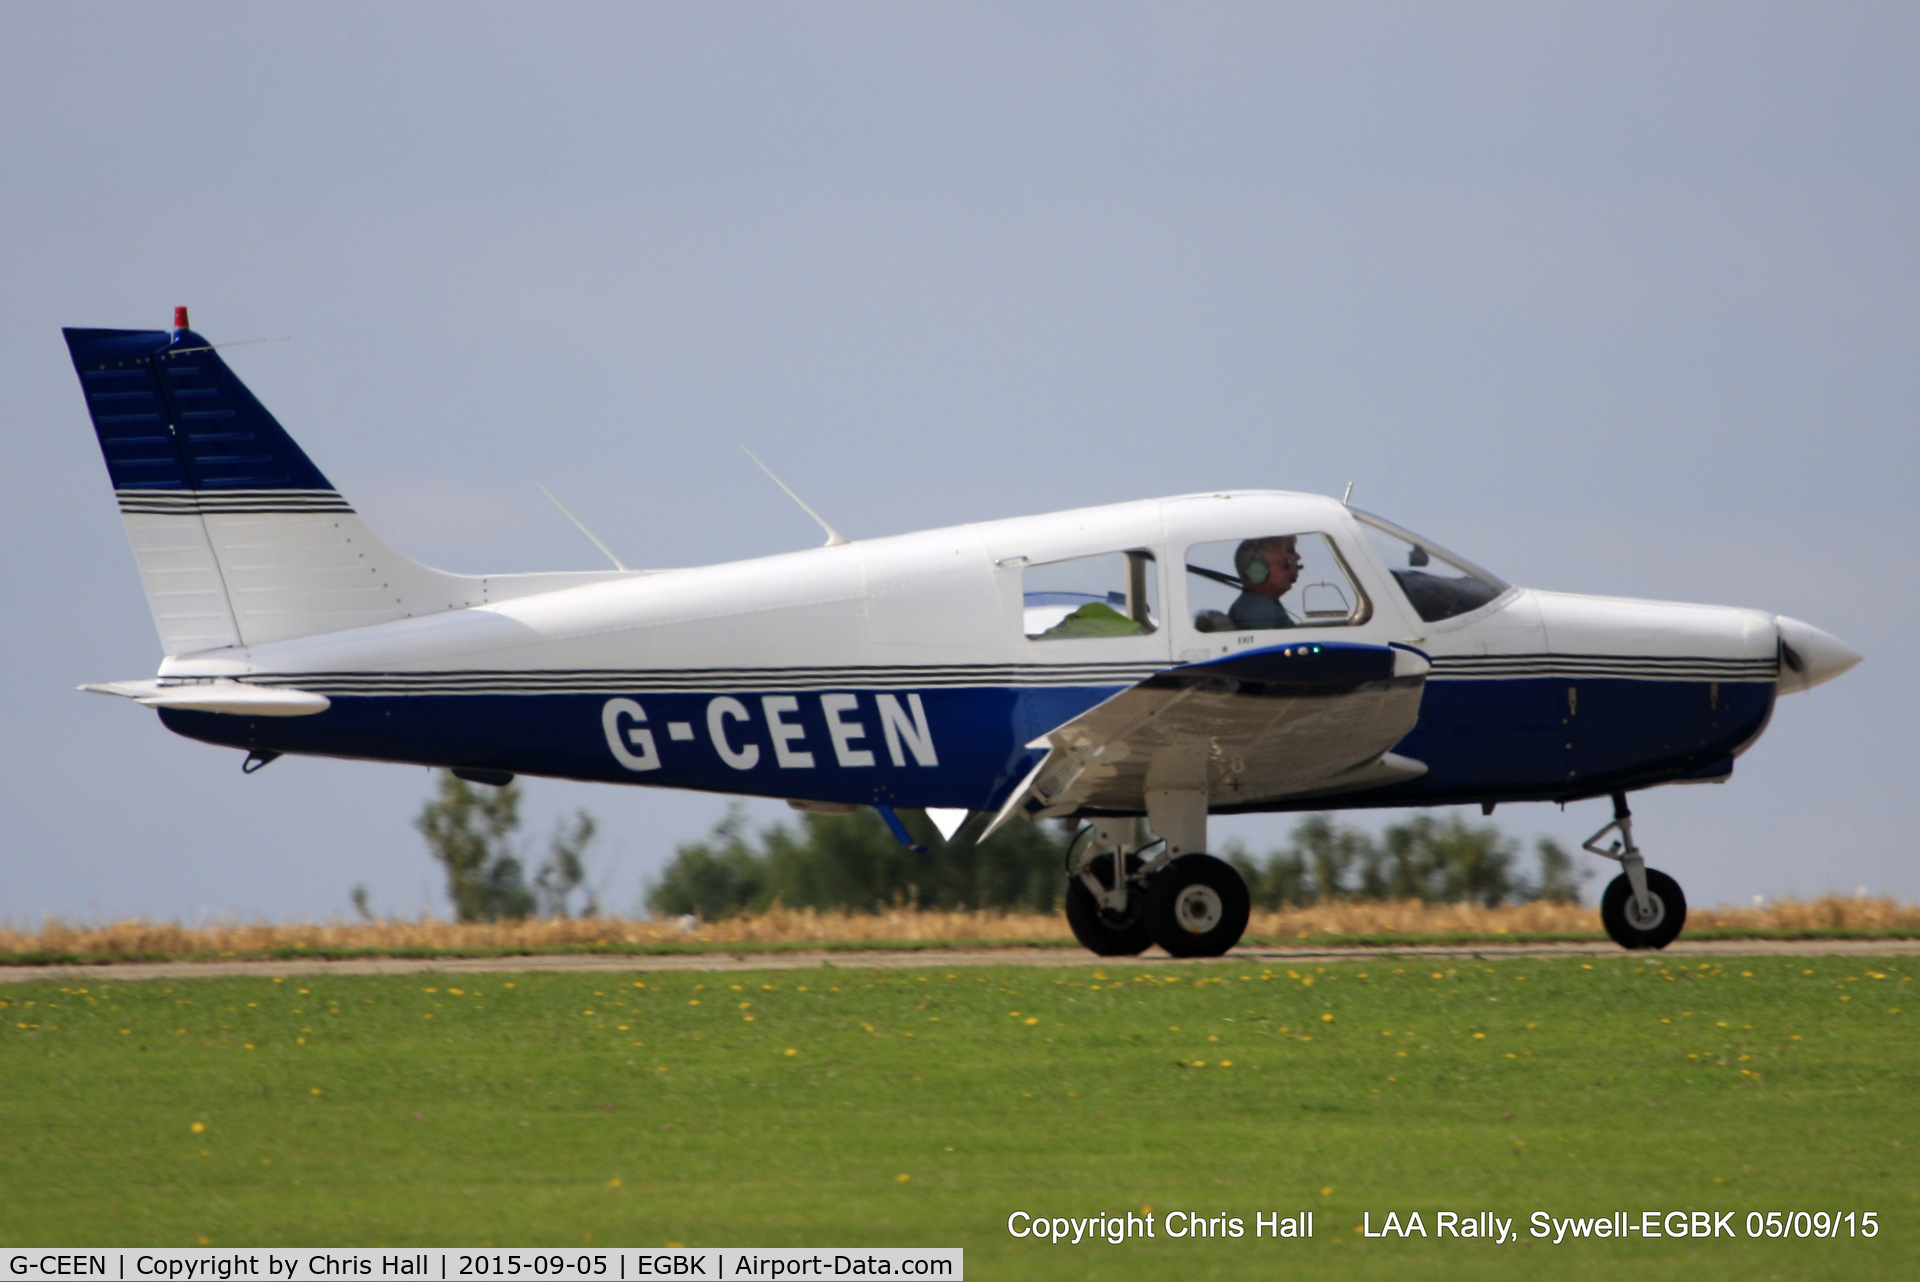 G-CEEN, 1990 Piper PA-28-161 Cadet C/N 2841293, at the LAA Rally 2015, Sywell